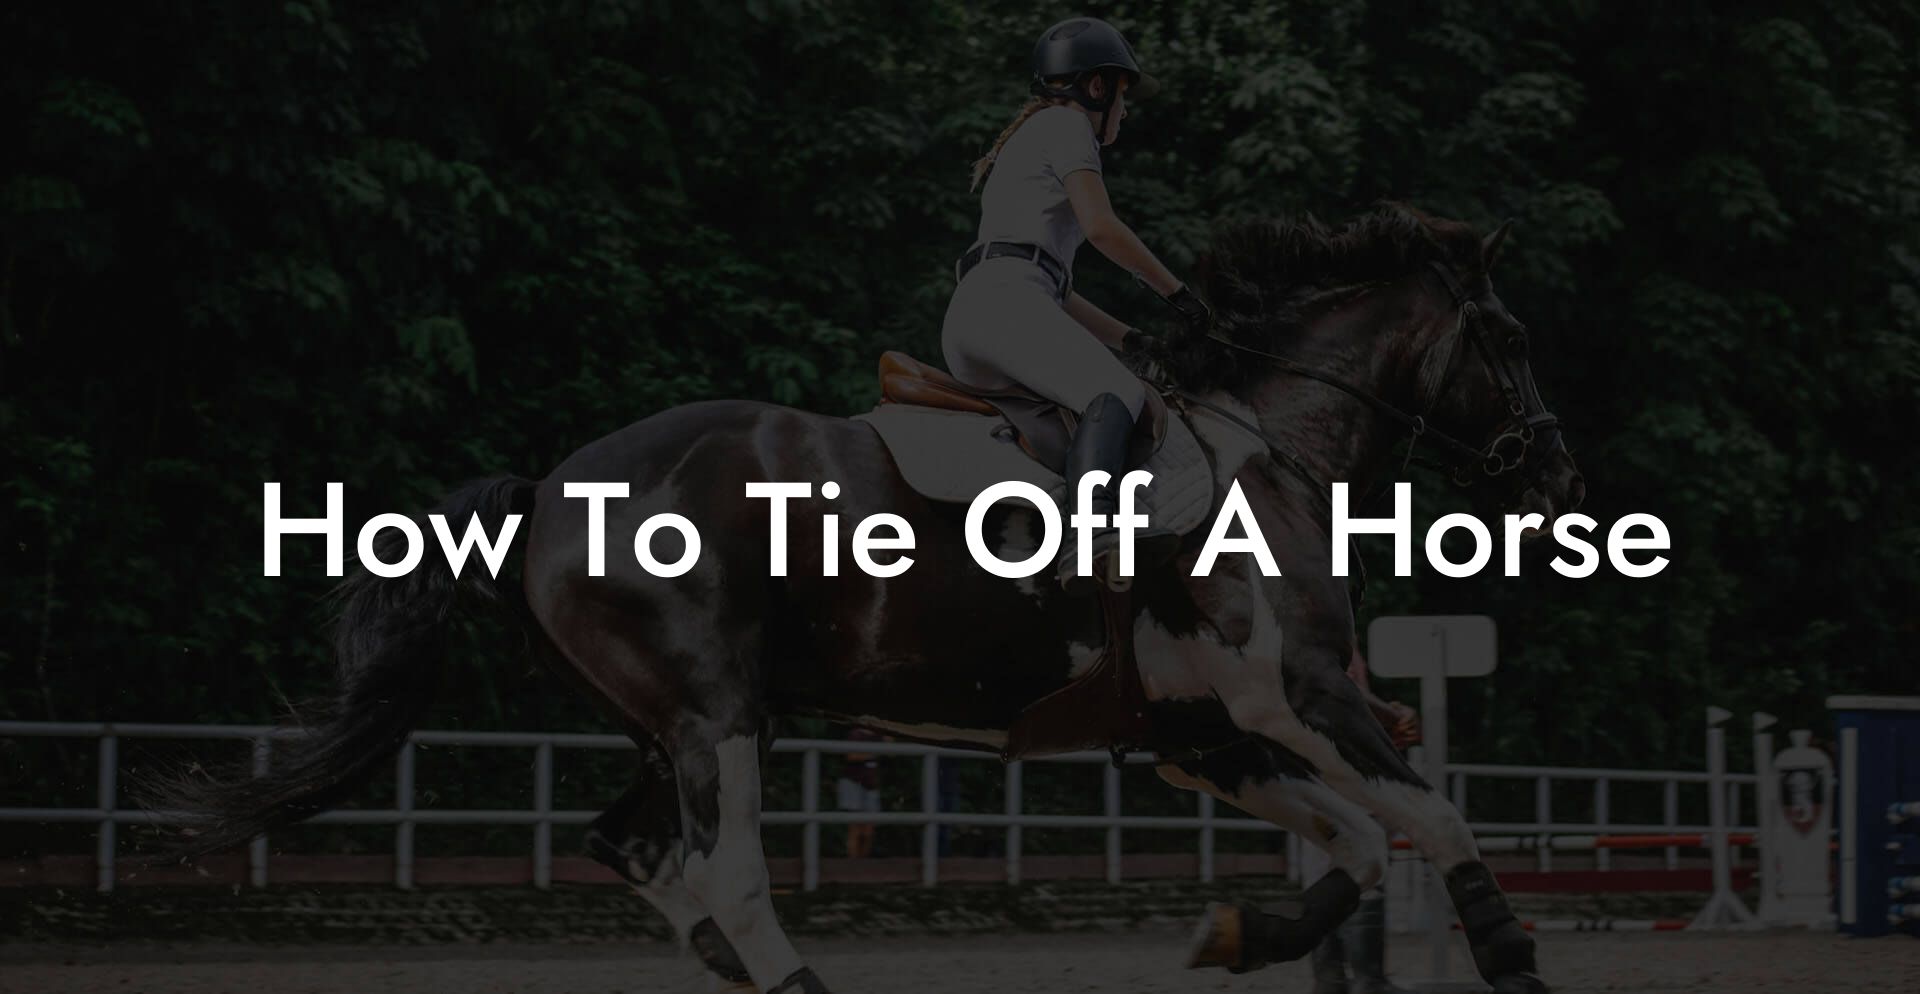 How To Tie Off A Horse